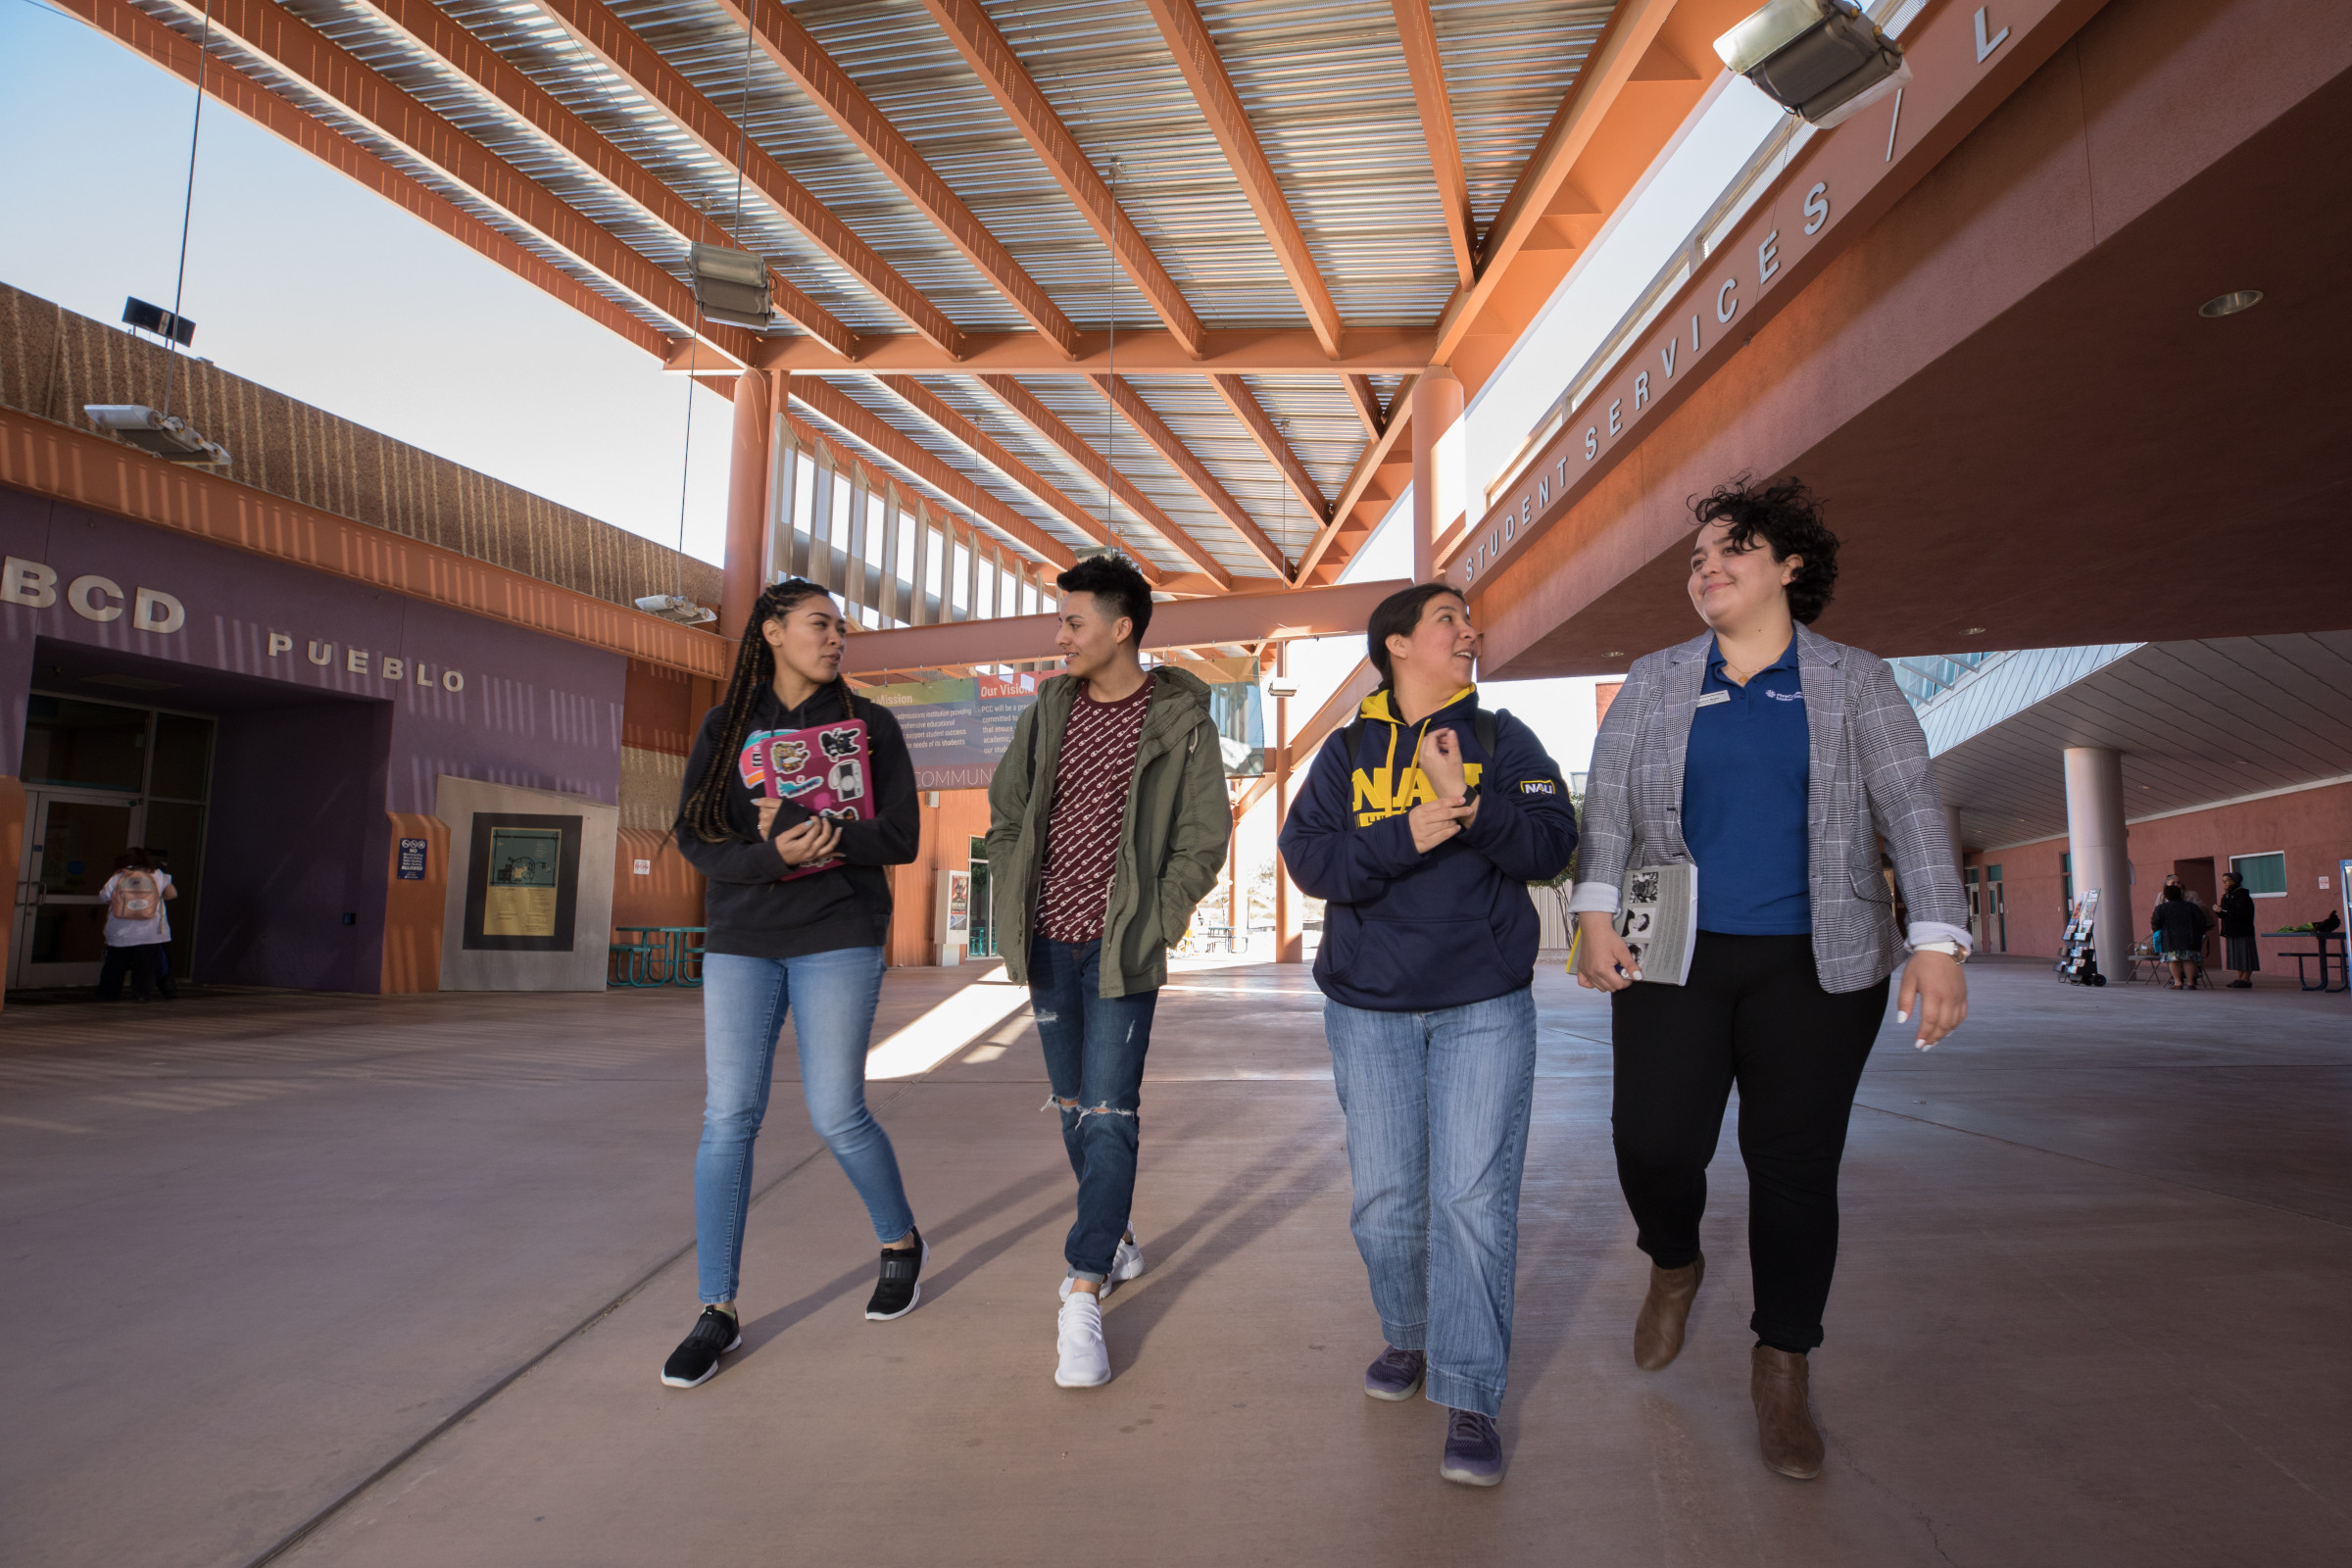 Students walking under a shade structure at Pima Community College.